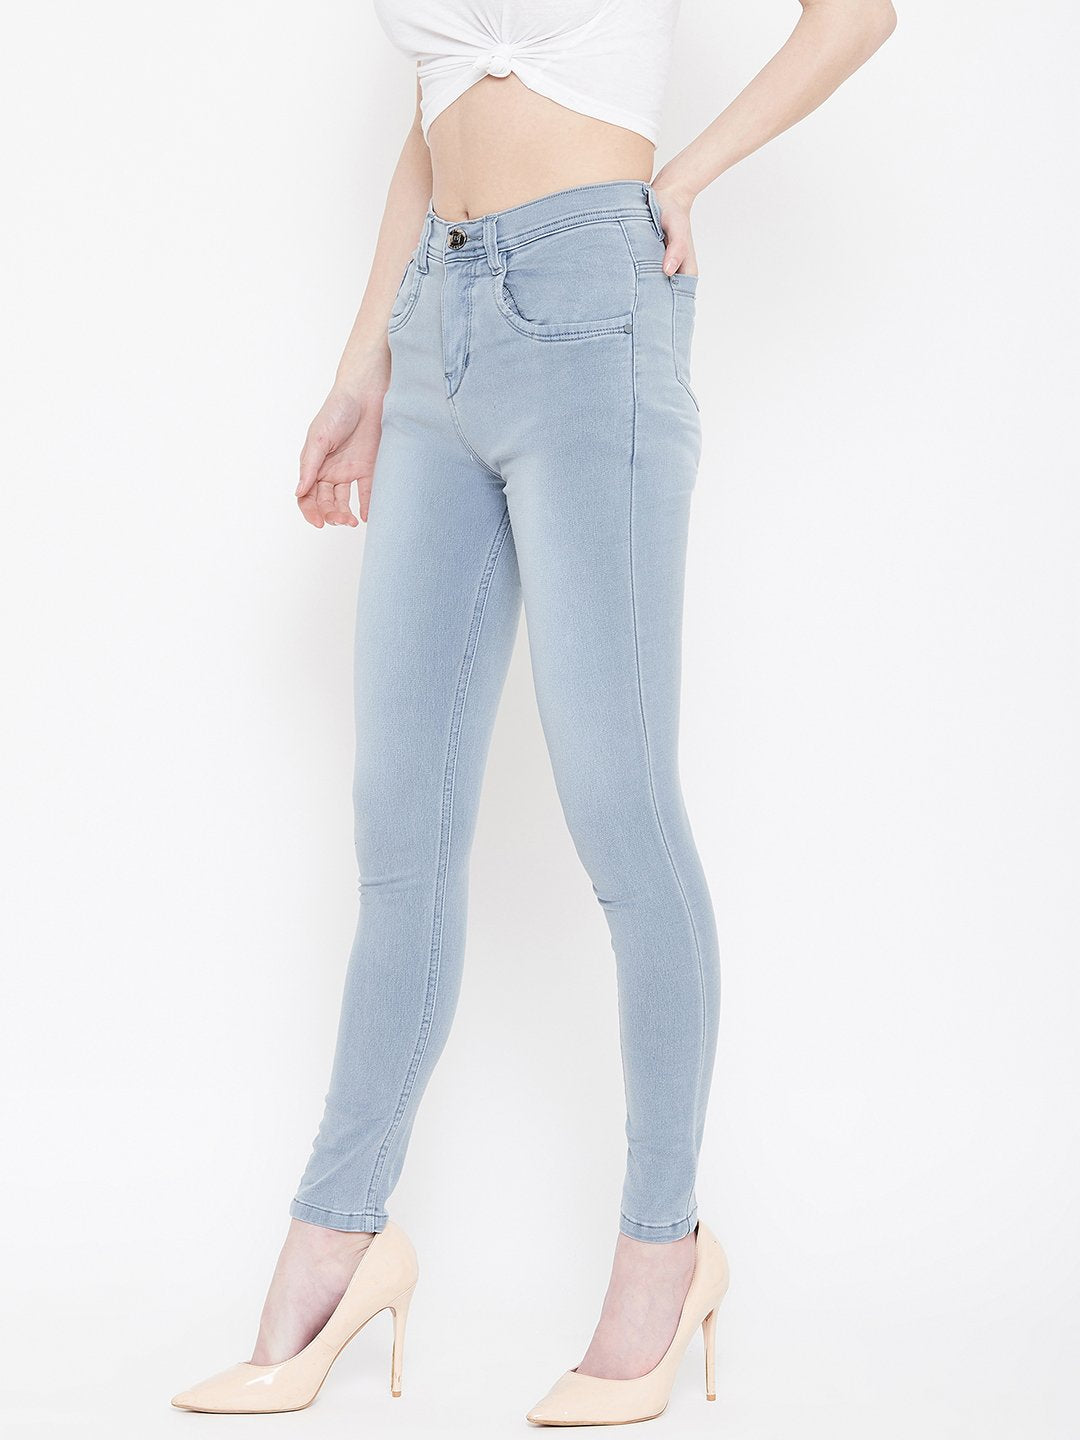 High Waist Stretchable Grey Jeans - NiftyJeans